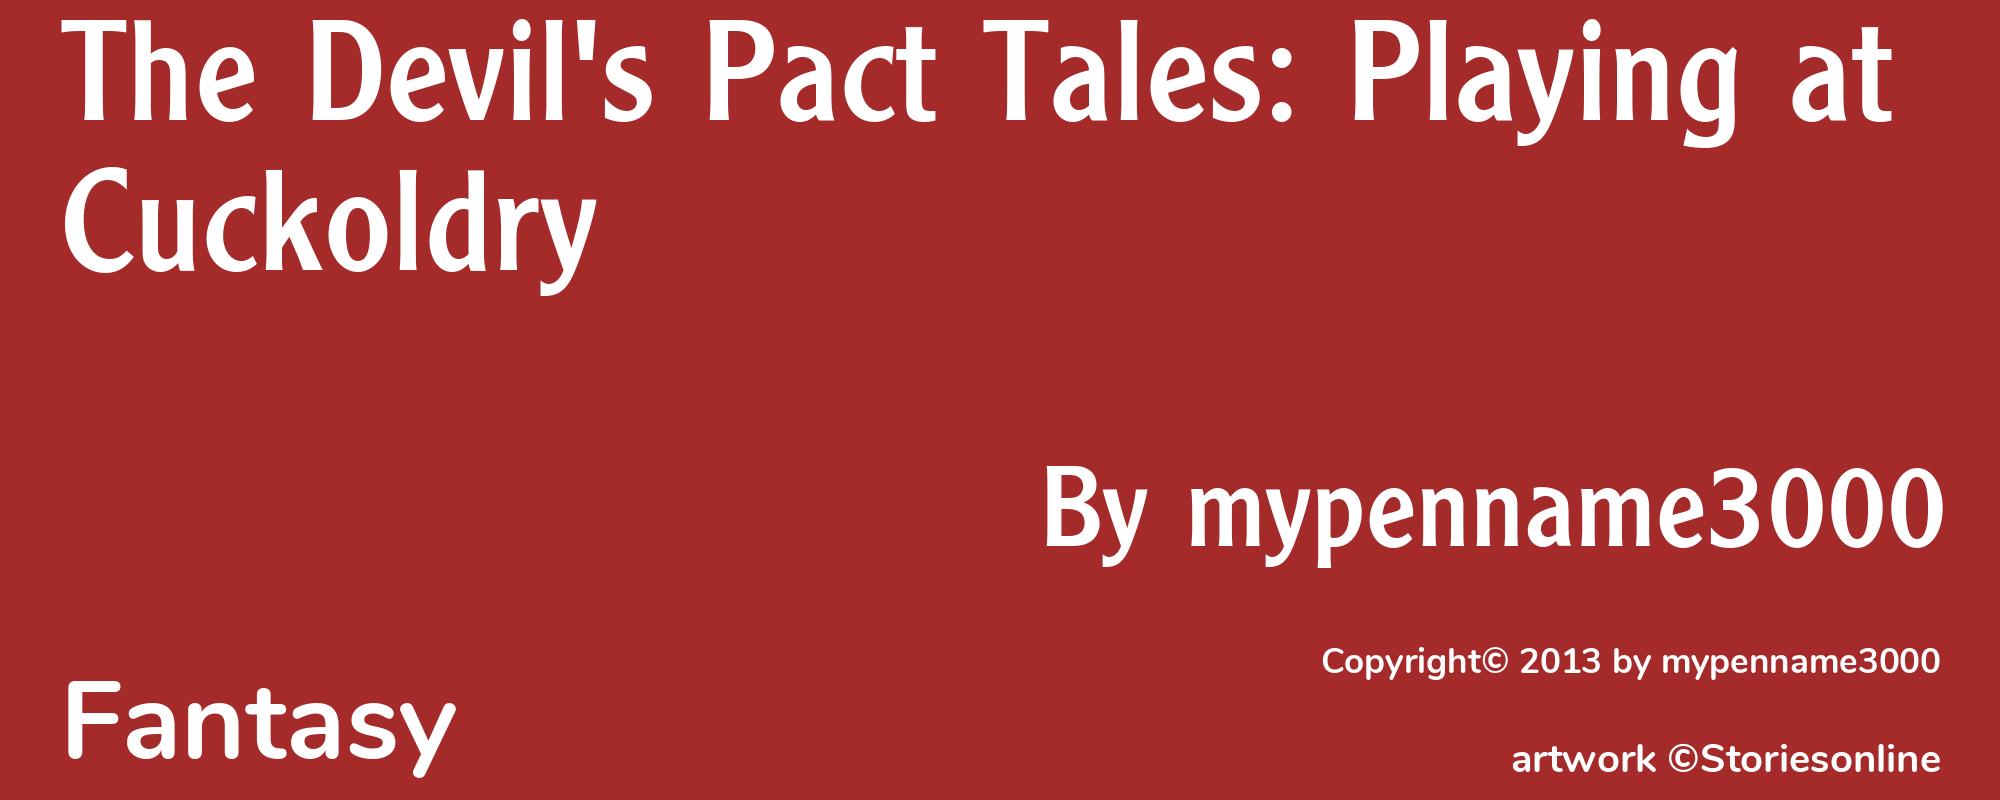 The Devil's Pact Tales: Playing at Cuckoldry - Cover